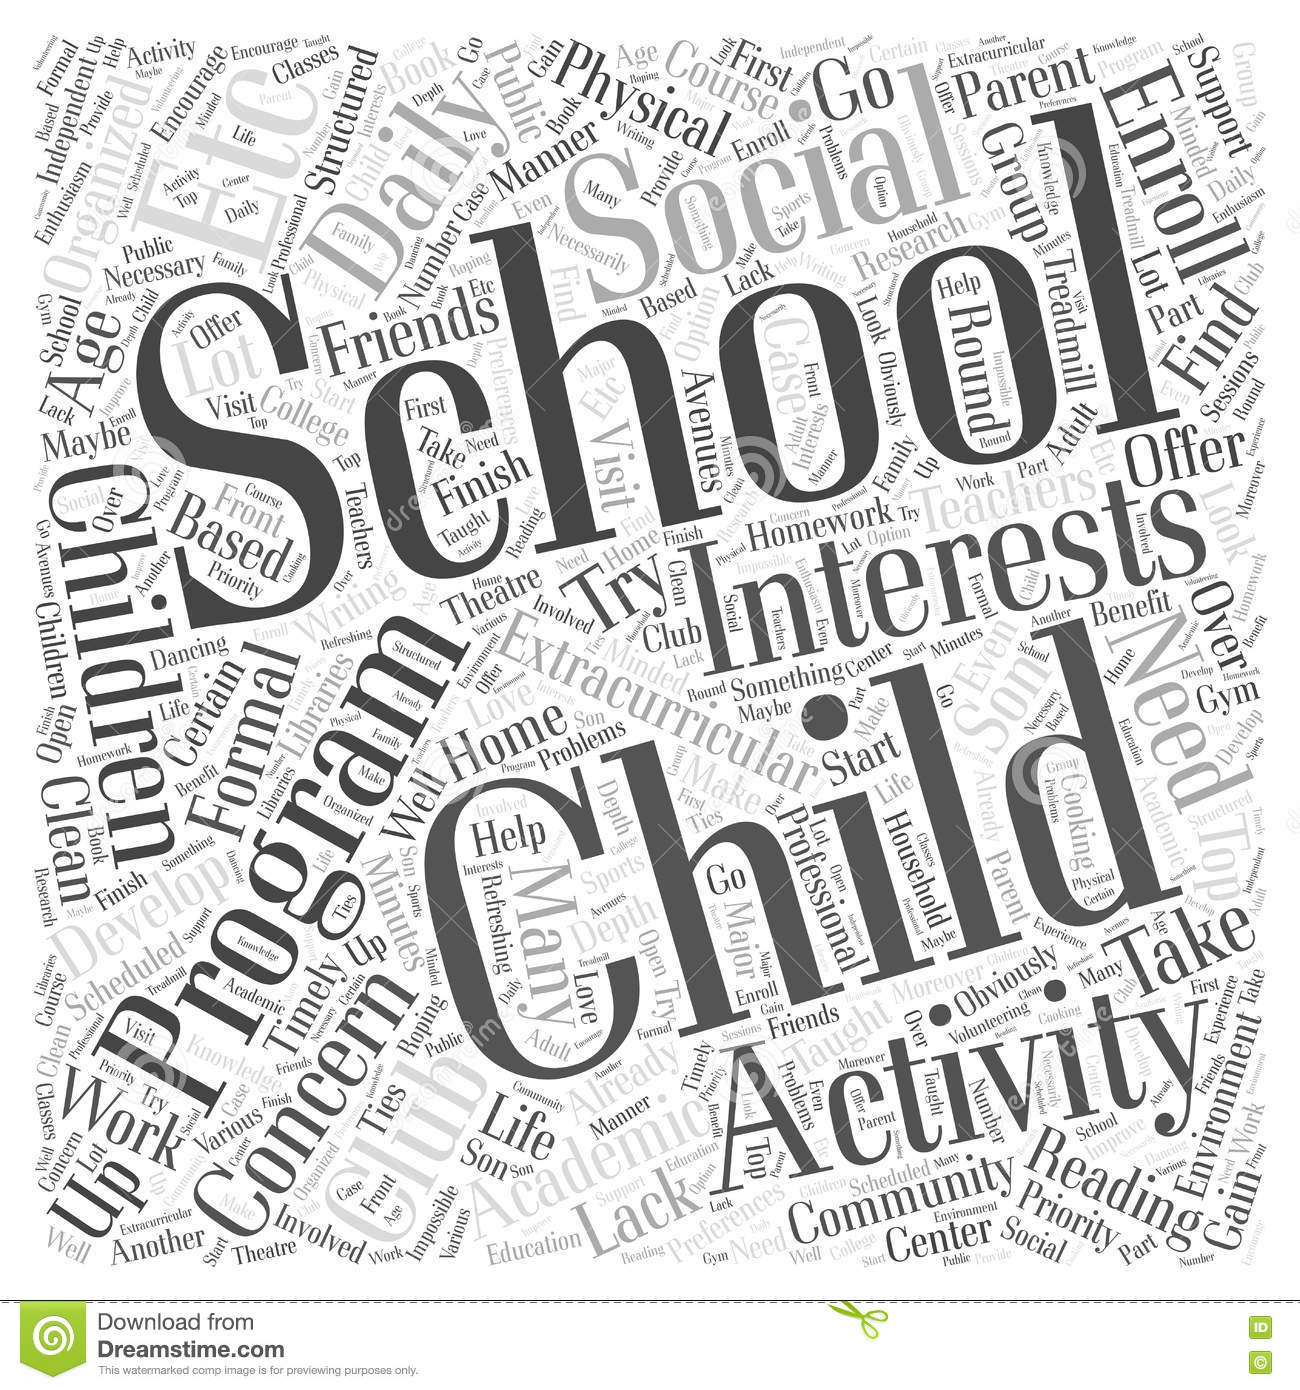 A Home Based After School Program Word Cloud Concept Stock.